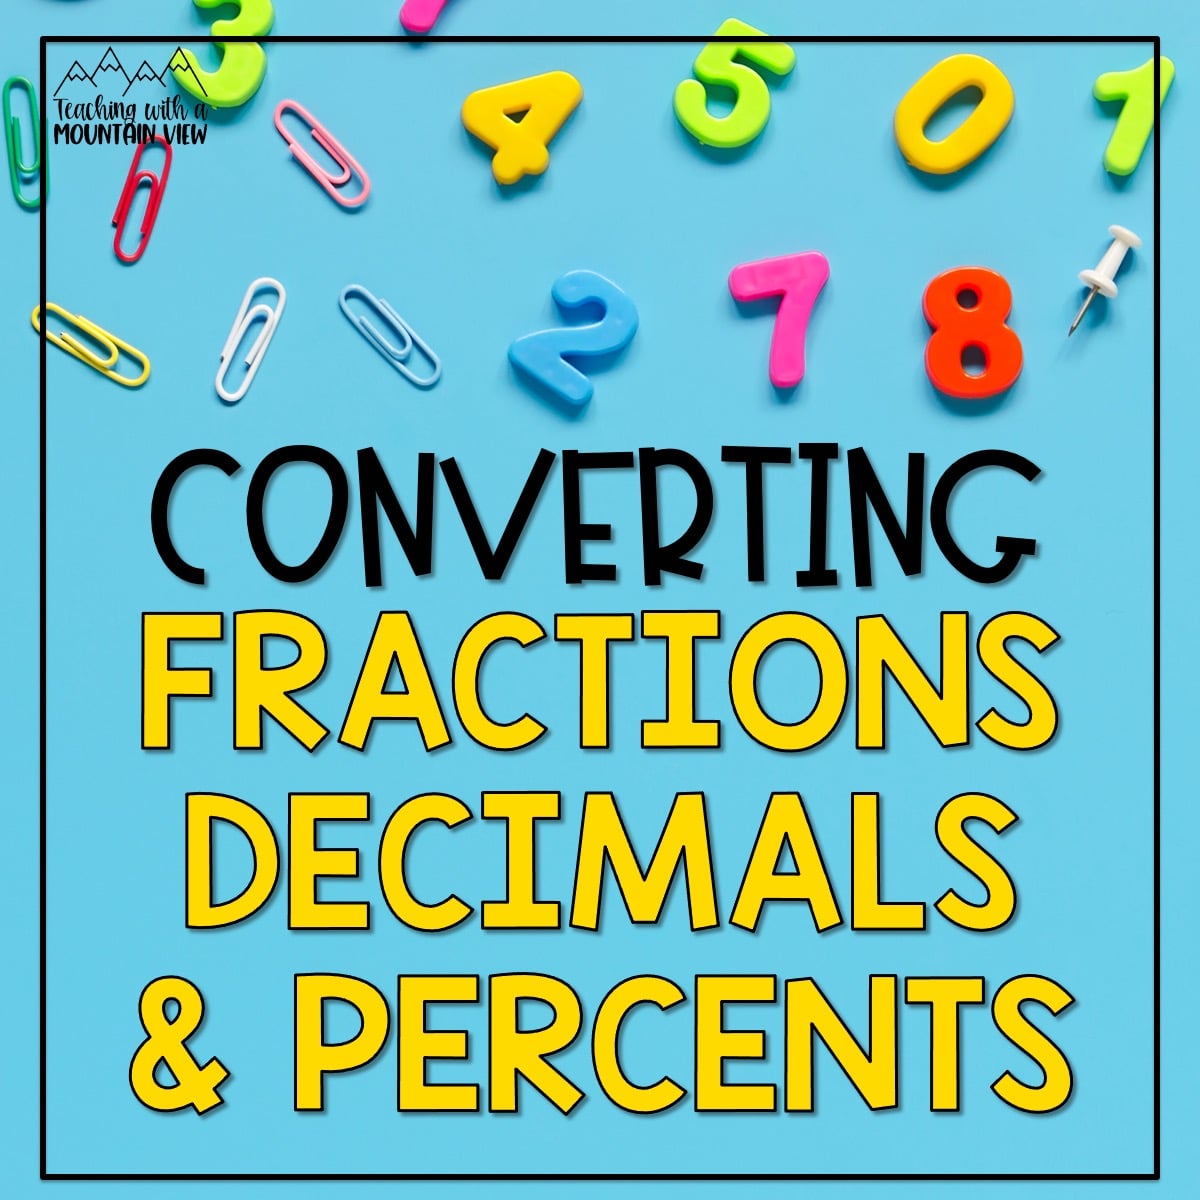 Teaching tips and activities for converting fractions, decimals and percents in upper elementary. Includes anchor charts and free task cards.